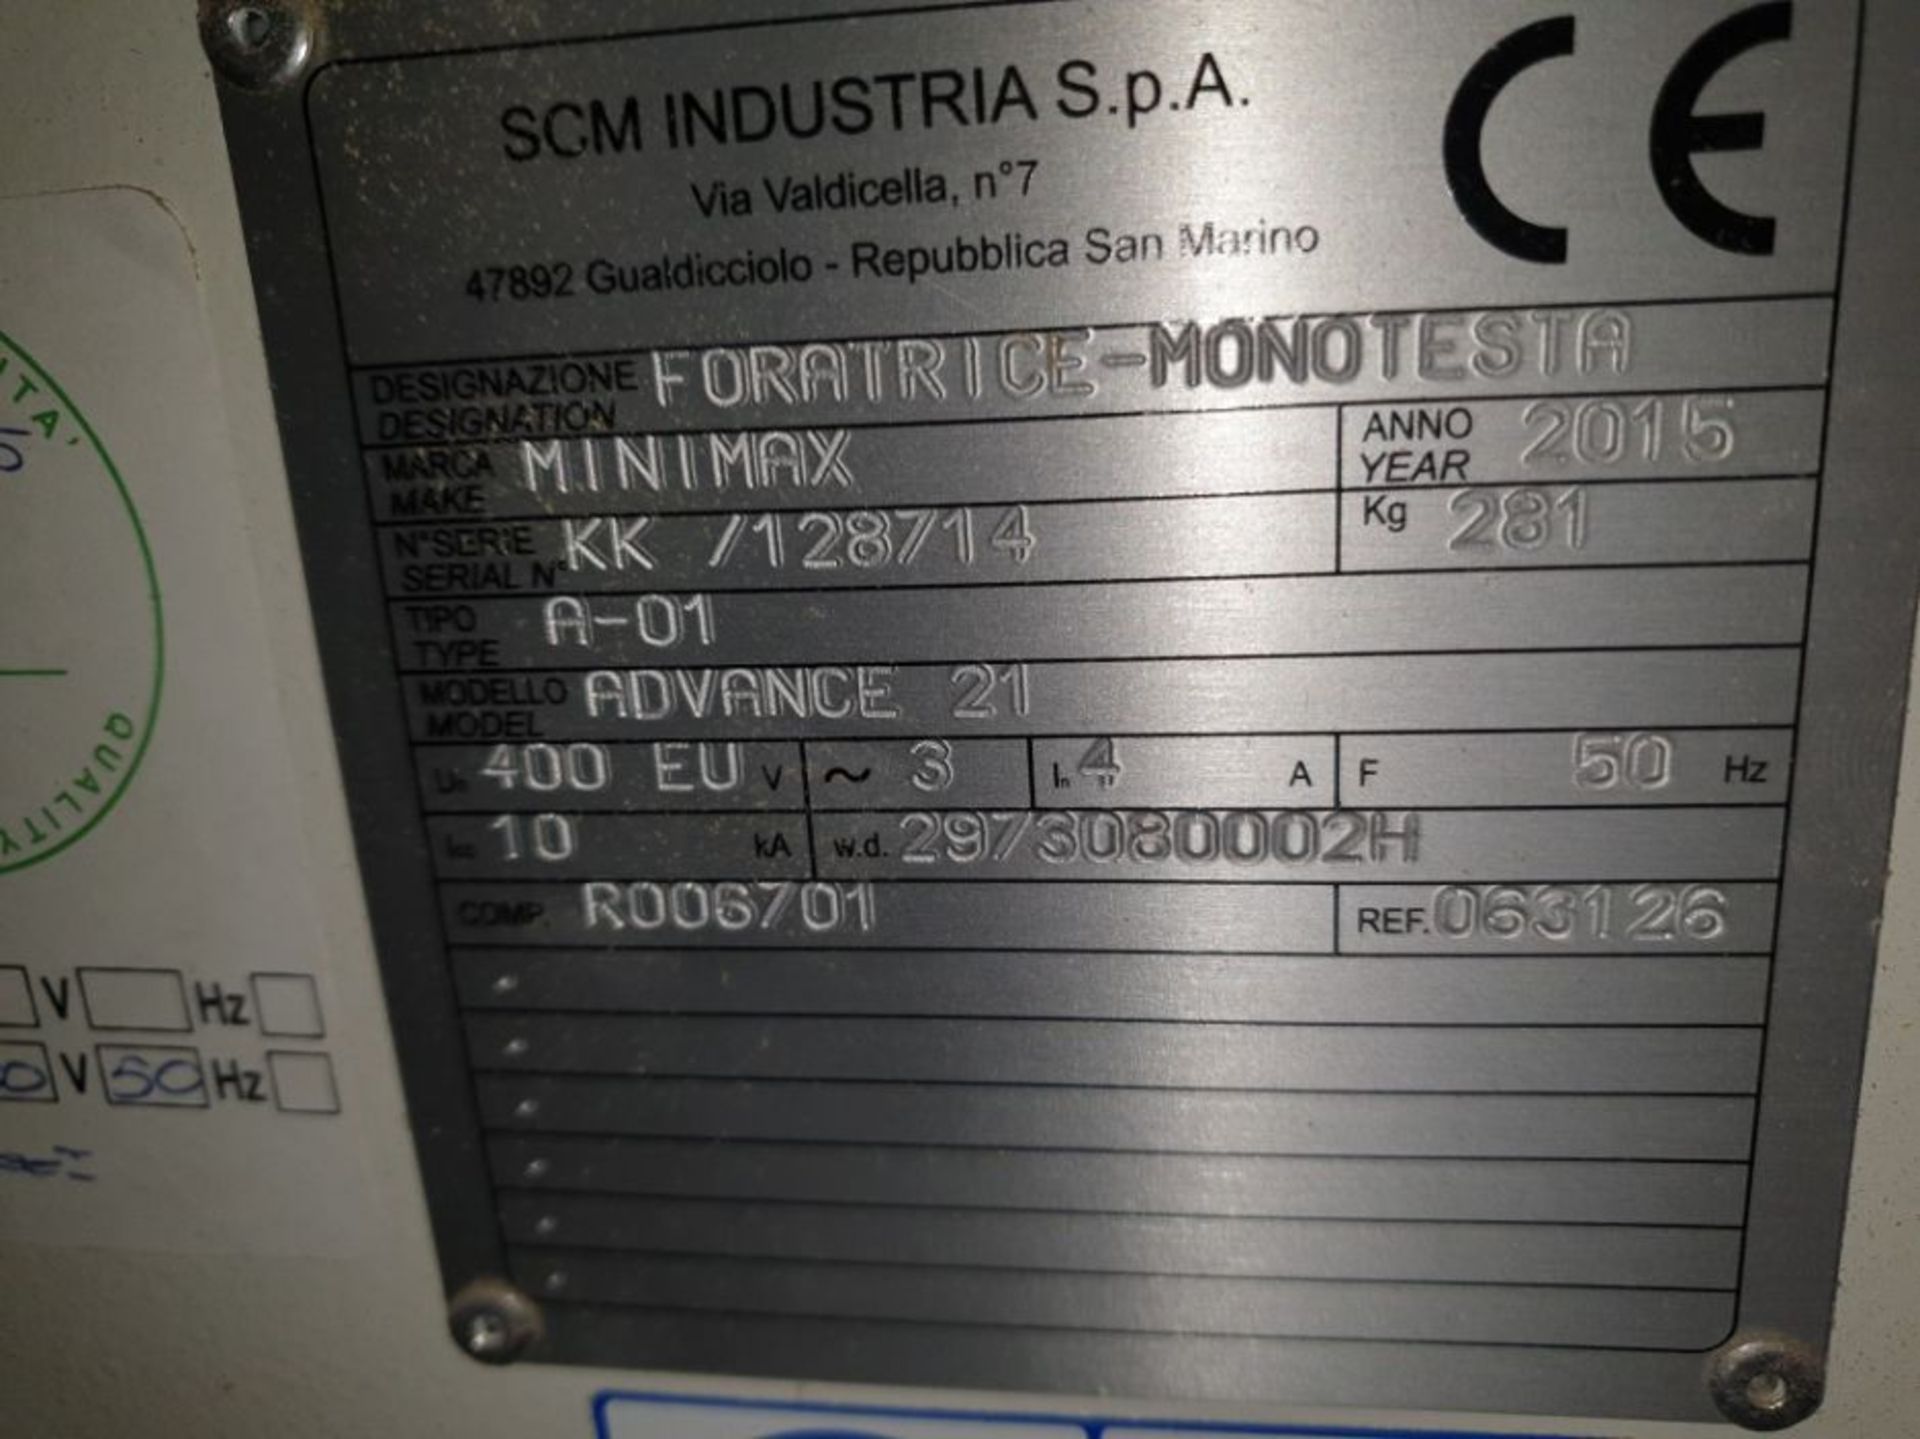 SCM Minimax Advance 21 Drilling Machine, Serial No. K/128714, Year of Manufacture 2015, 21 spindle - Image 4 of 4